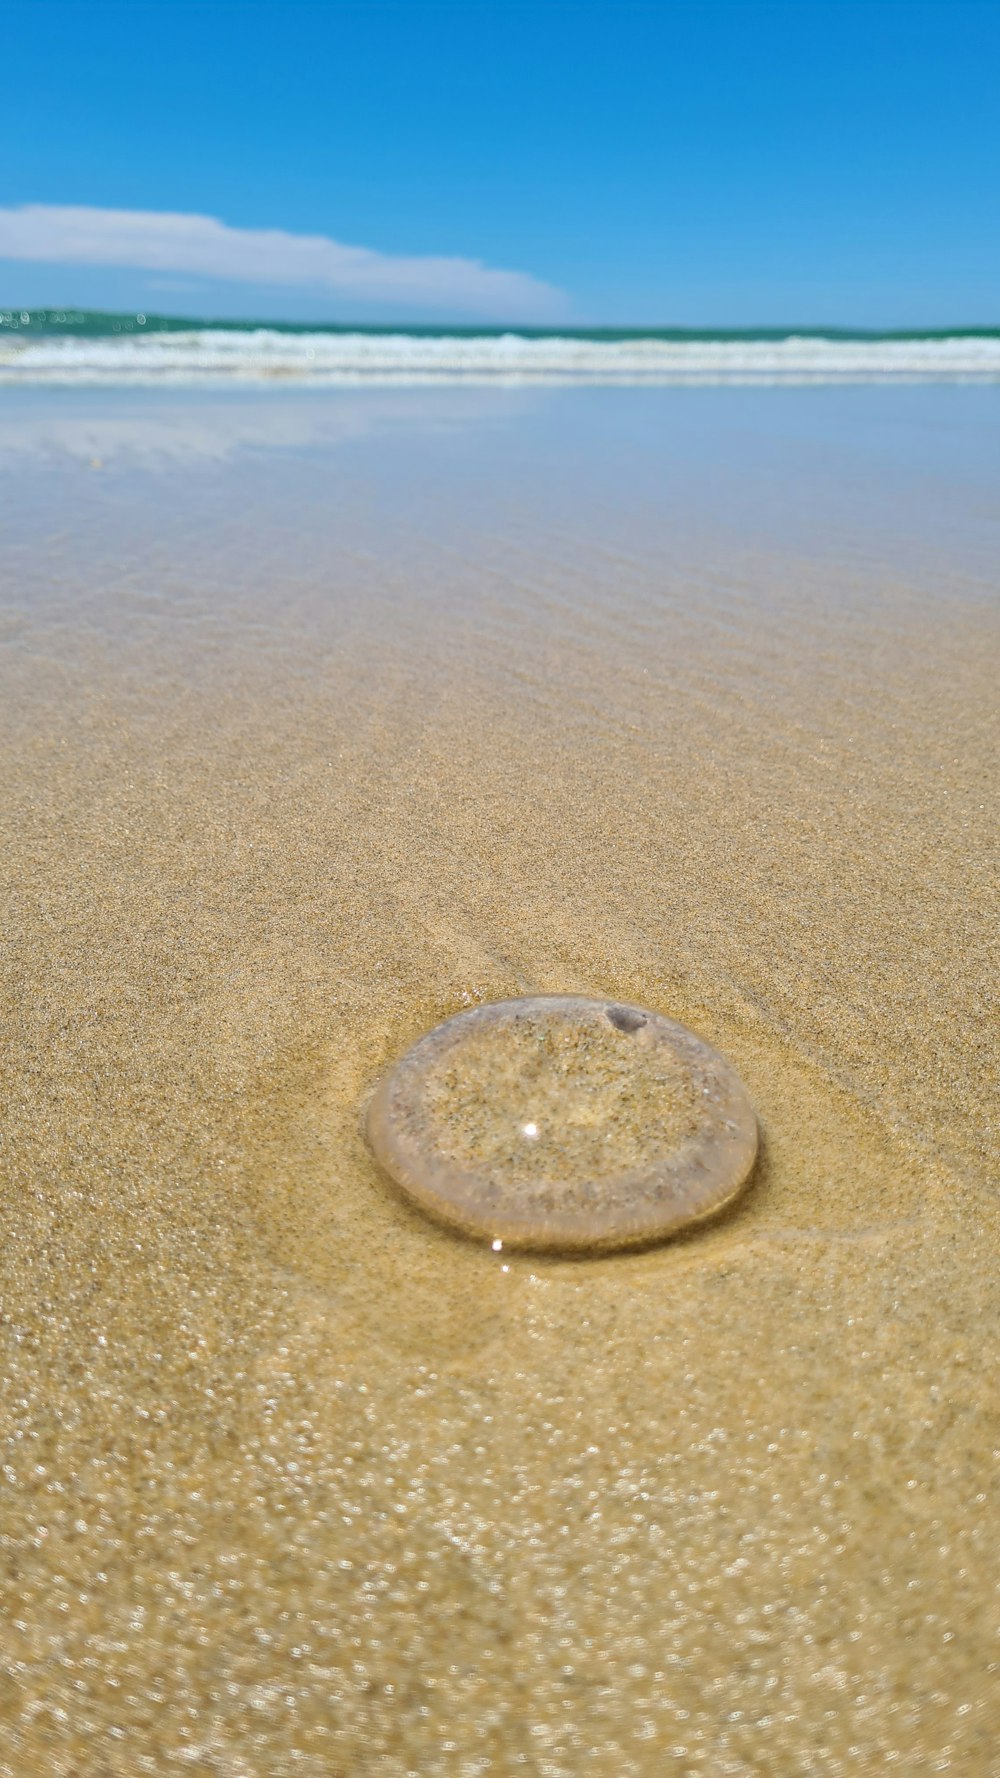 a round object in the sand at the beach